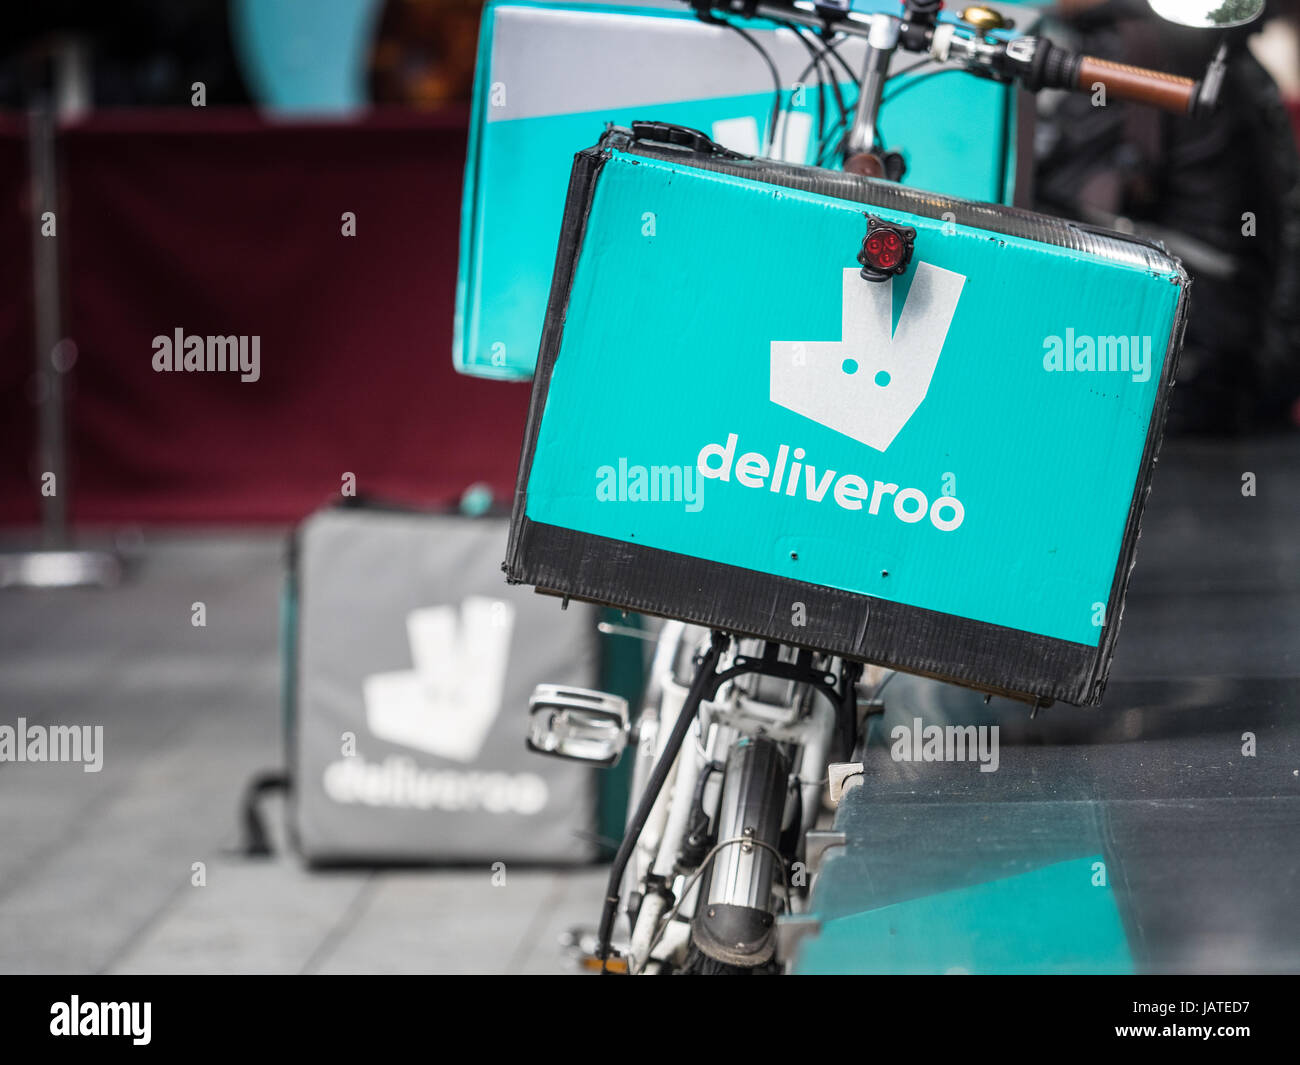 Deliveroo Food Delivery Bikes in London. Deliveroo is competing with Uber Eats in this fast growing market. Stock Photo